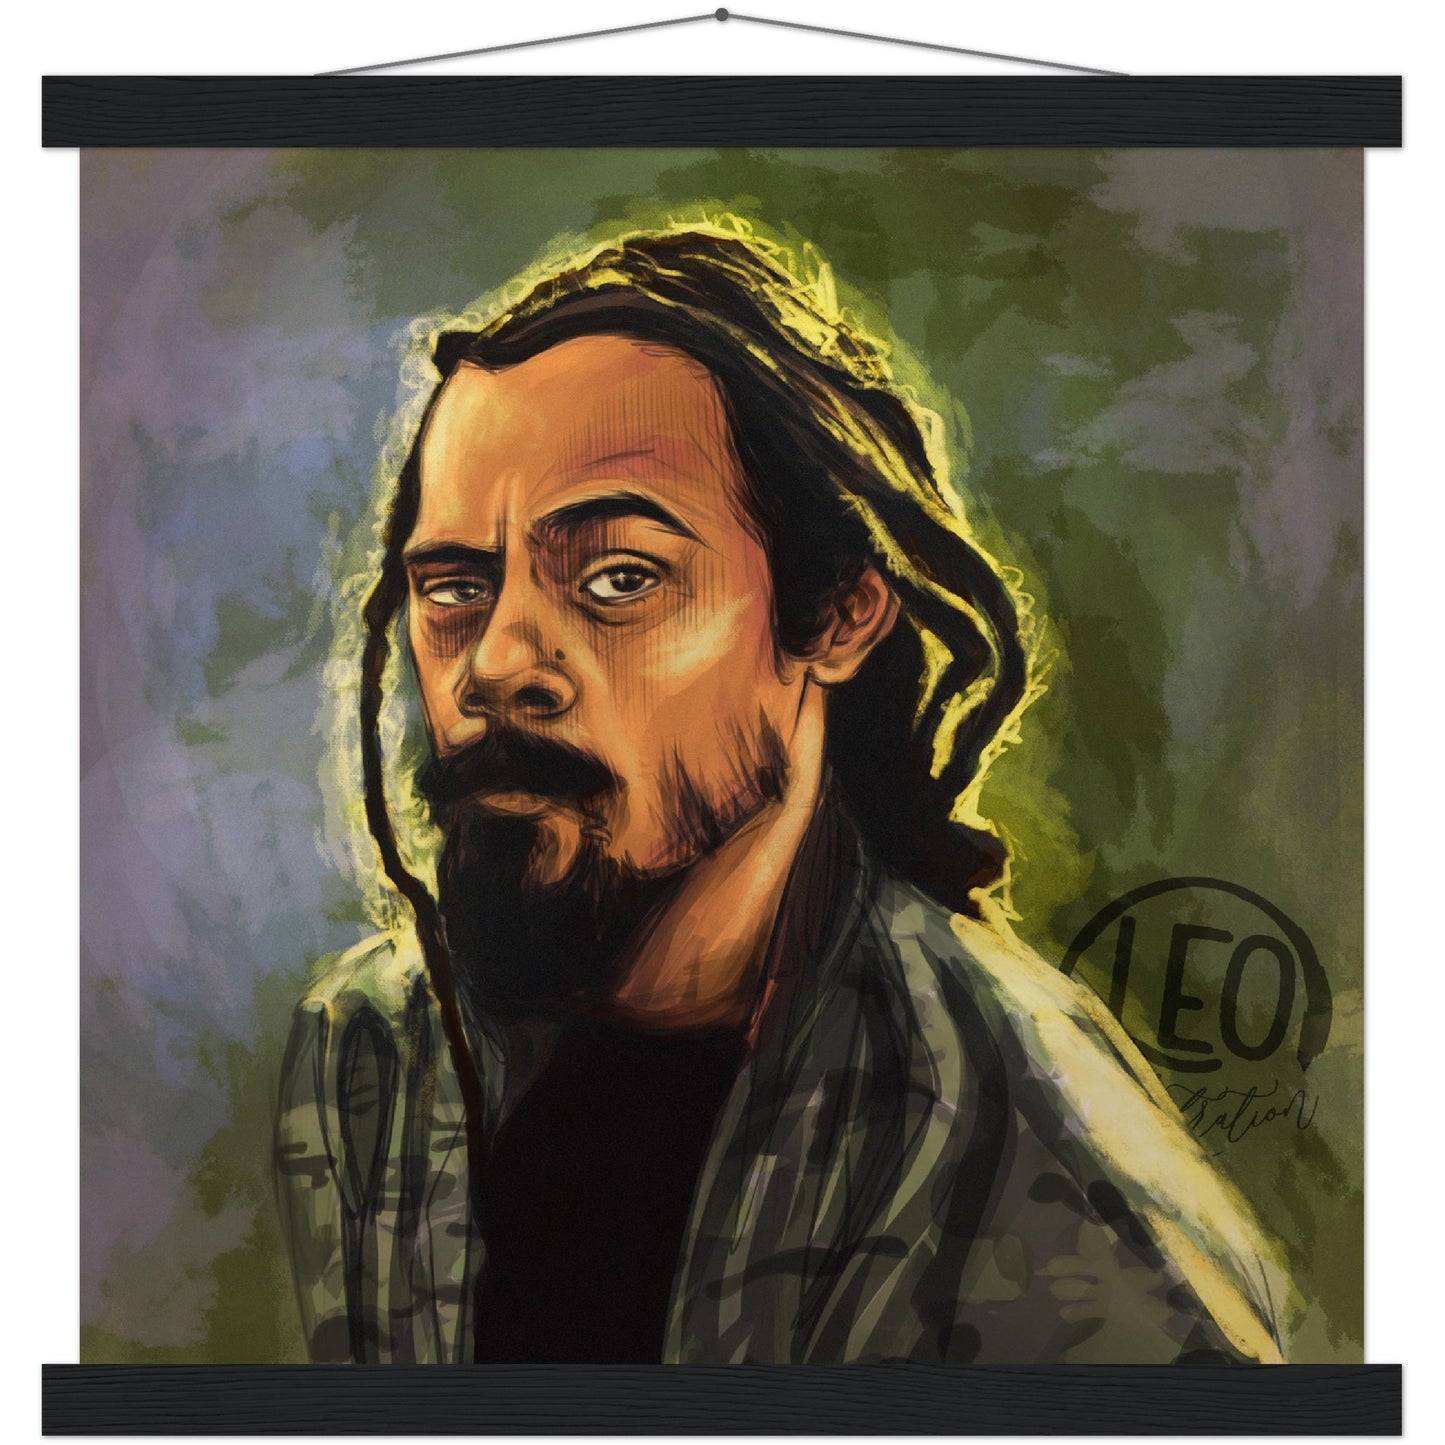 Damian Marley art portrait from Leonora, print it on a fine poster in good quality! Reggae and Dancehall Art prints!